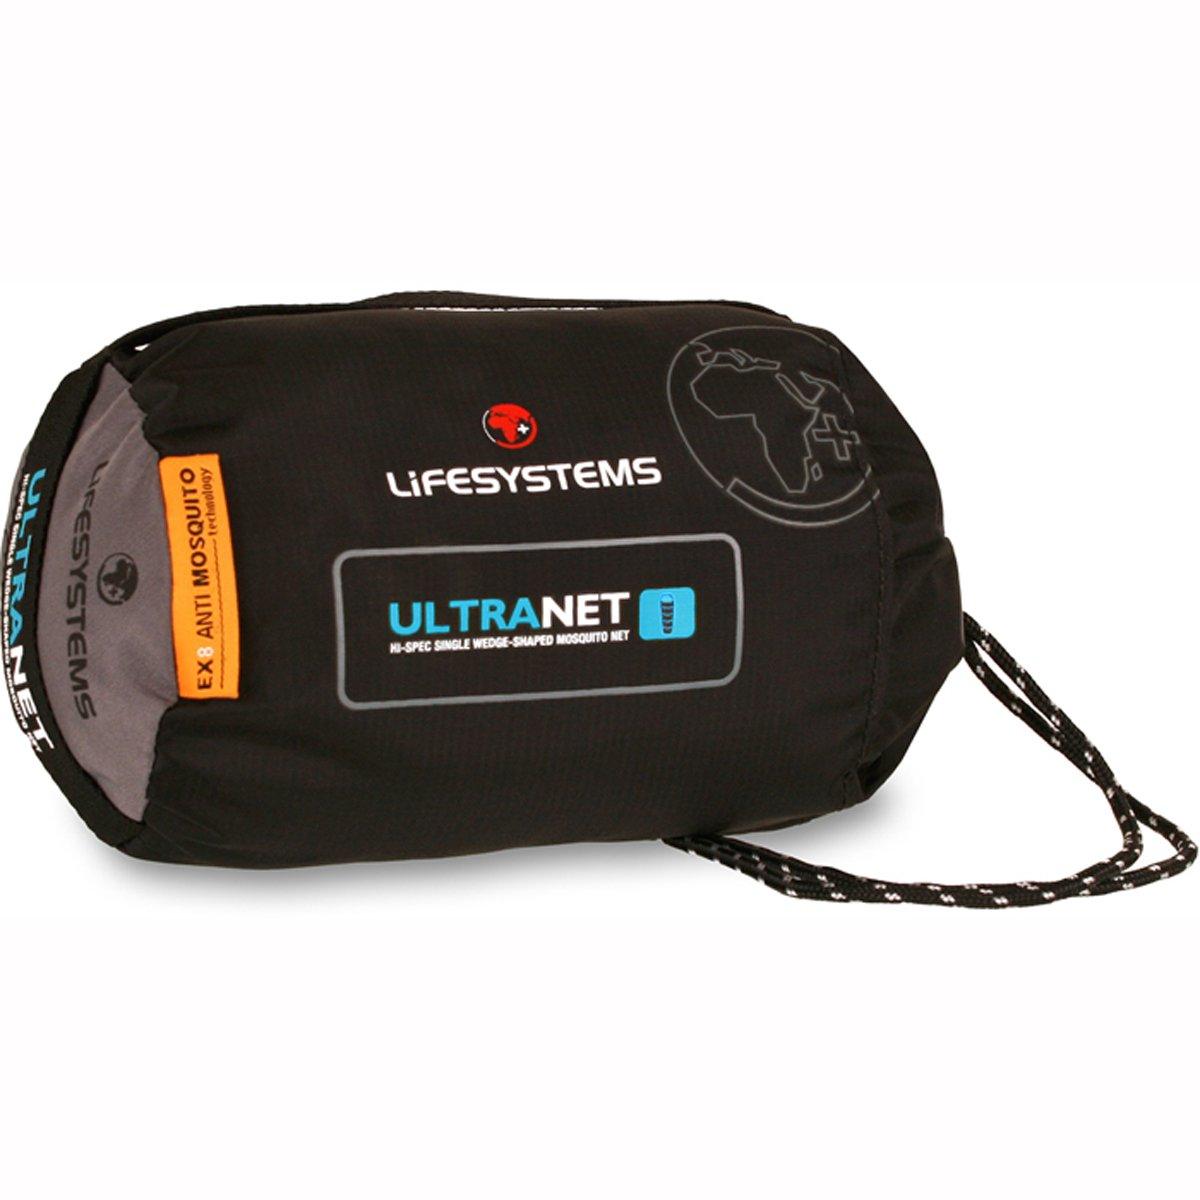 Lifesystems UltraNet Single Mosquito Net - Black - Browse our range of Accessories: Travel - getgearedshop 